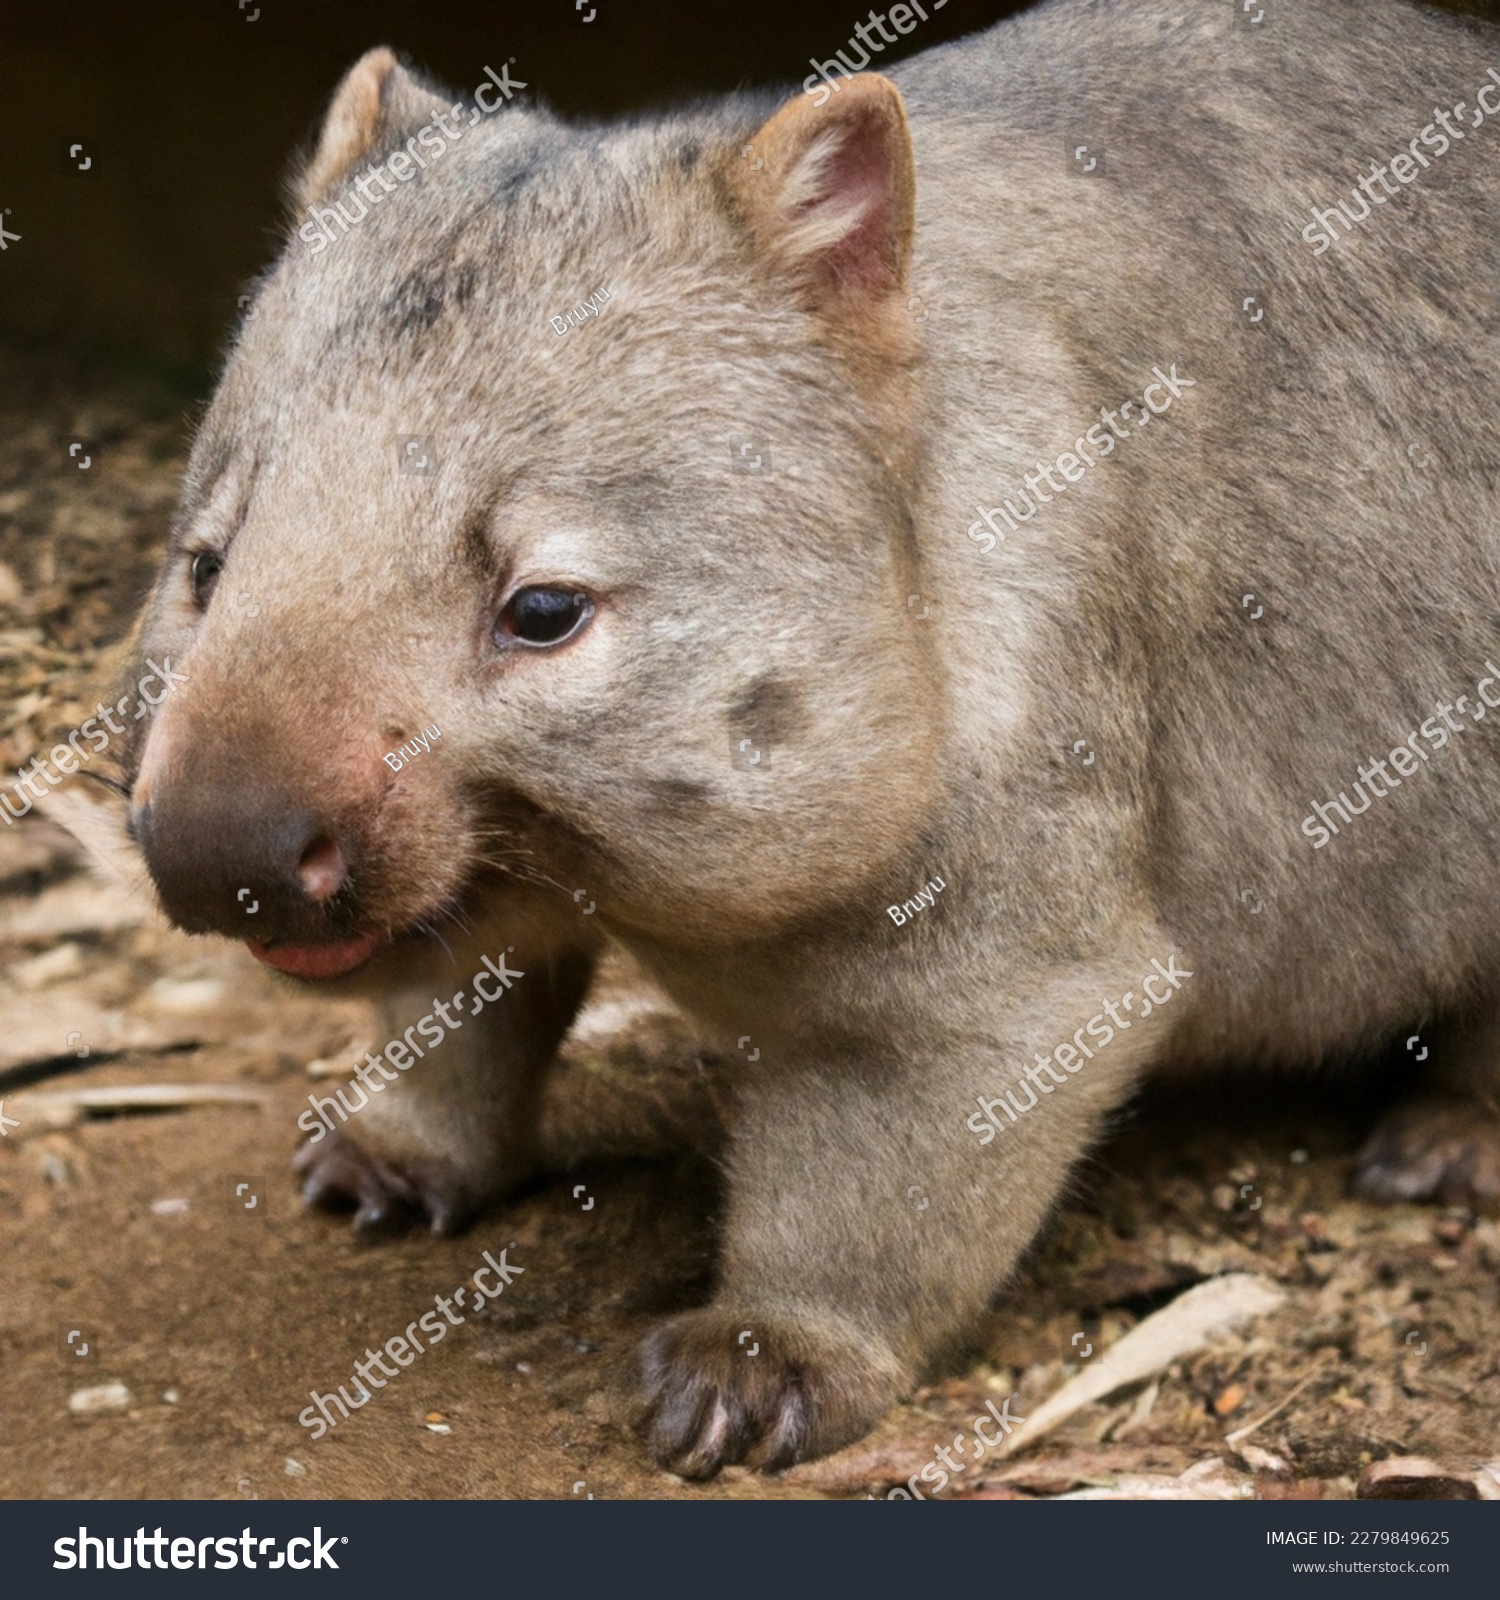 ‏The northern hairy-nosed wombat (Lasiorhinus krefftii) or yaminon is one of three extant species of Australian marsupials known as wombats. It is one of the rarest land mammals in the world #2279849625